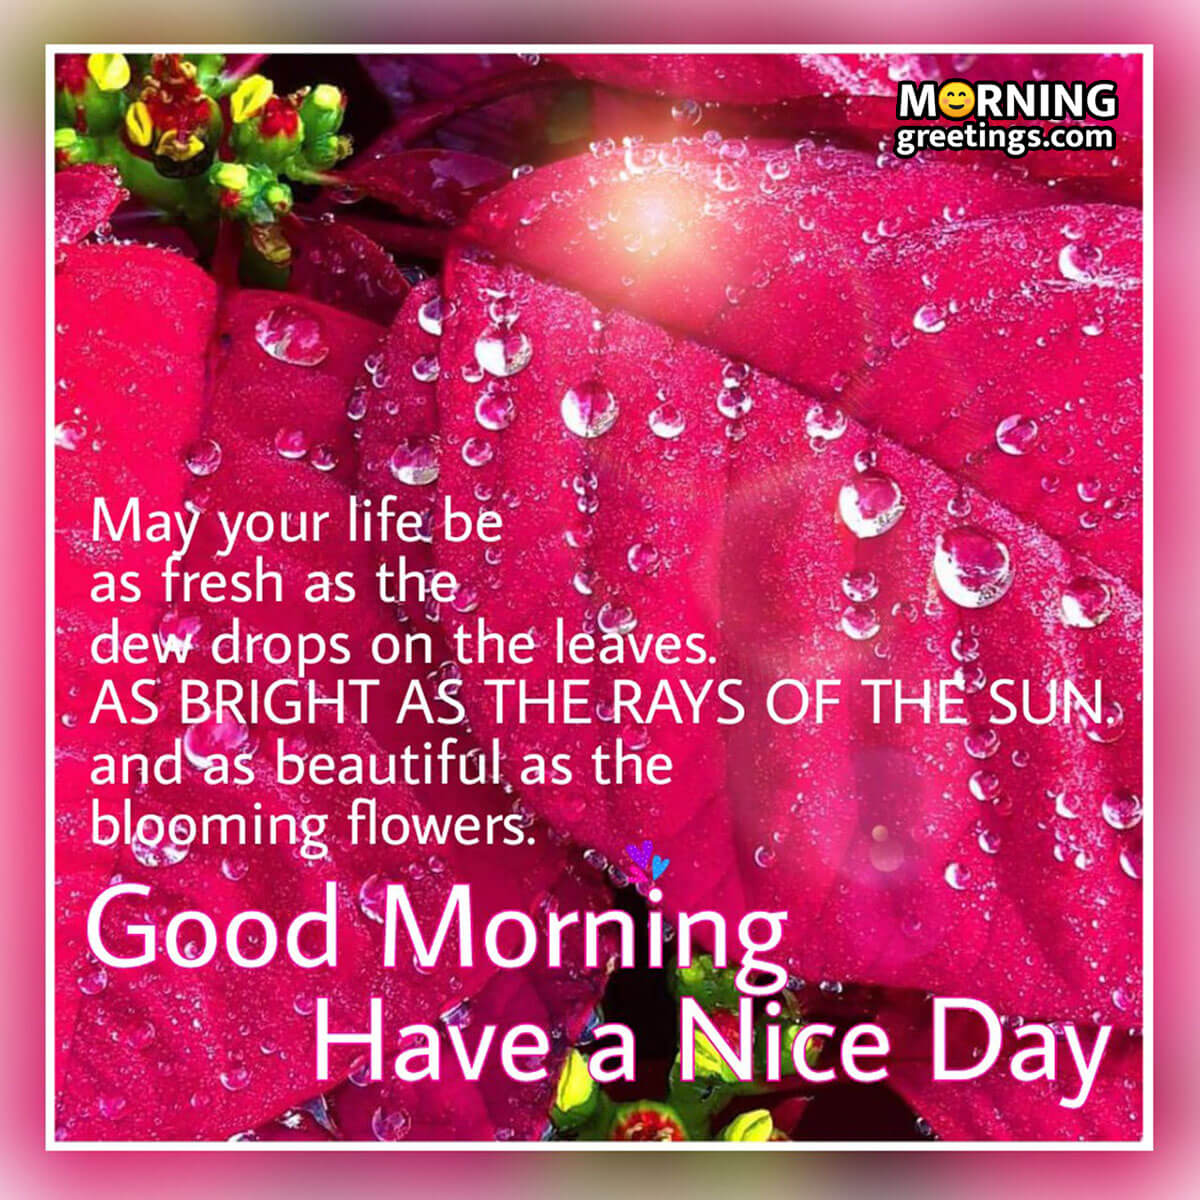 45 Good Morning Wishes Pictures - Morning Greetings – Morning ...